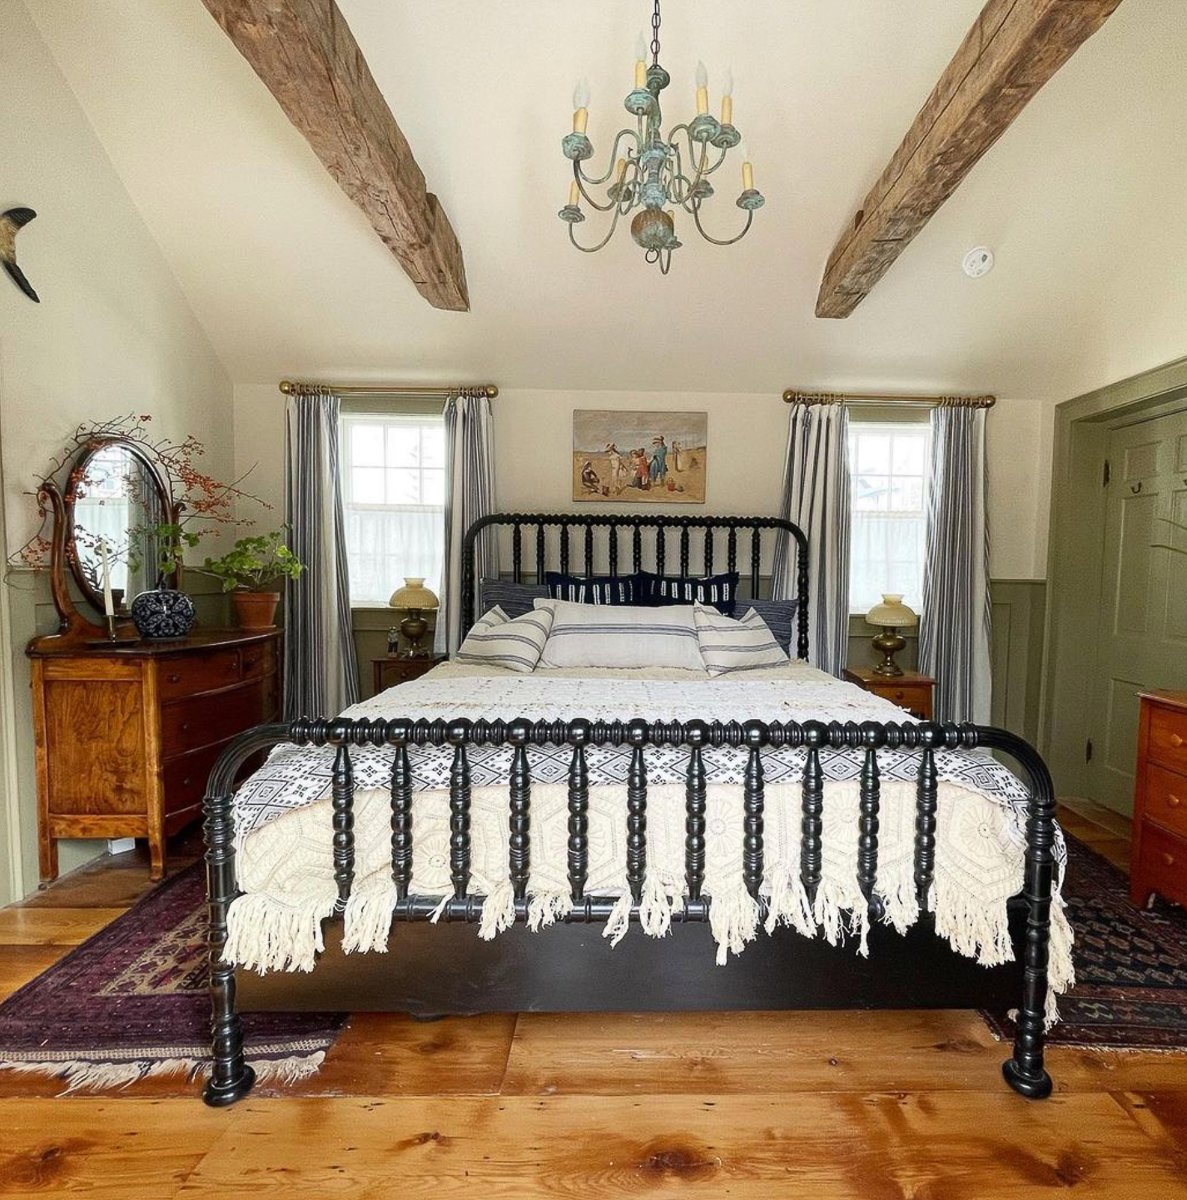 Love this Jenny Lind bed painted black and in this antiques filled bedroom